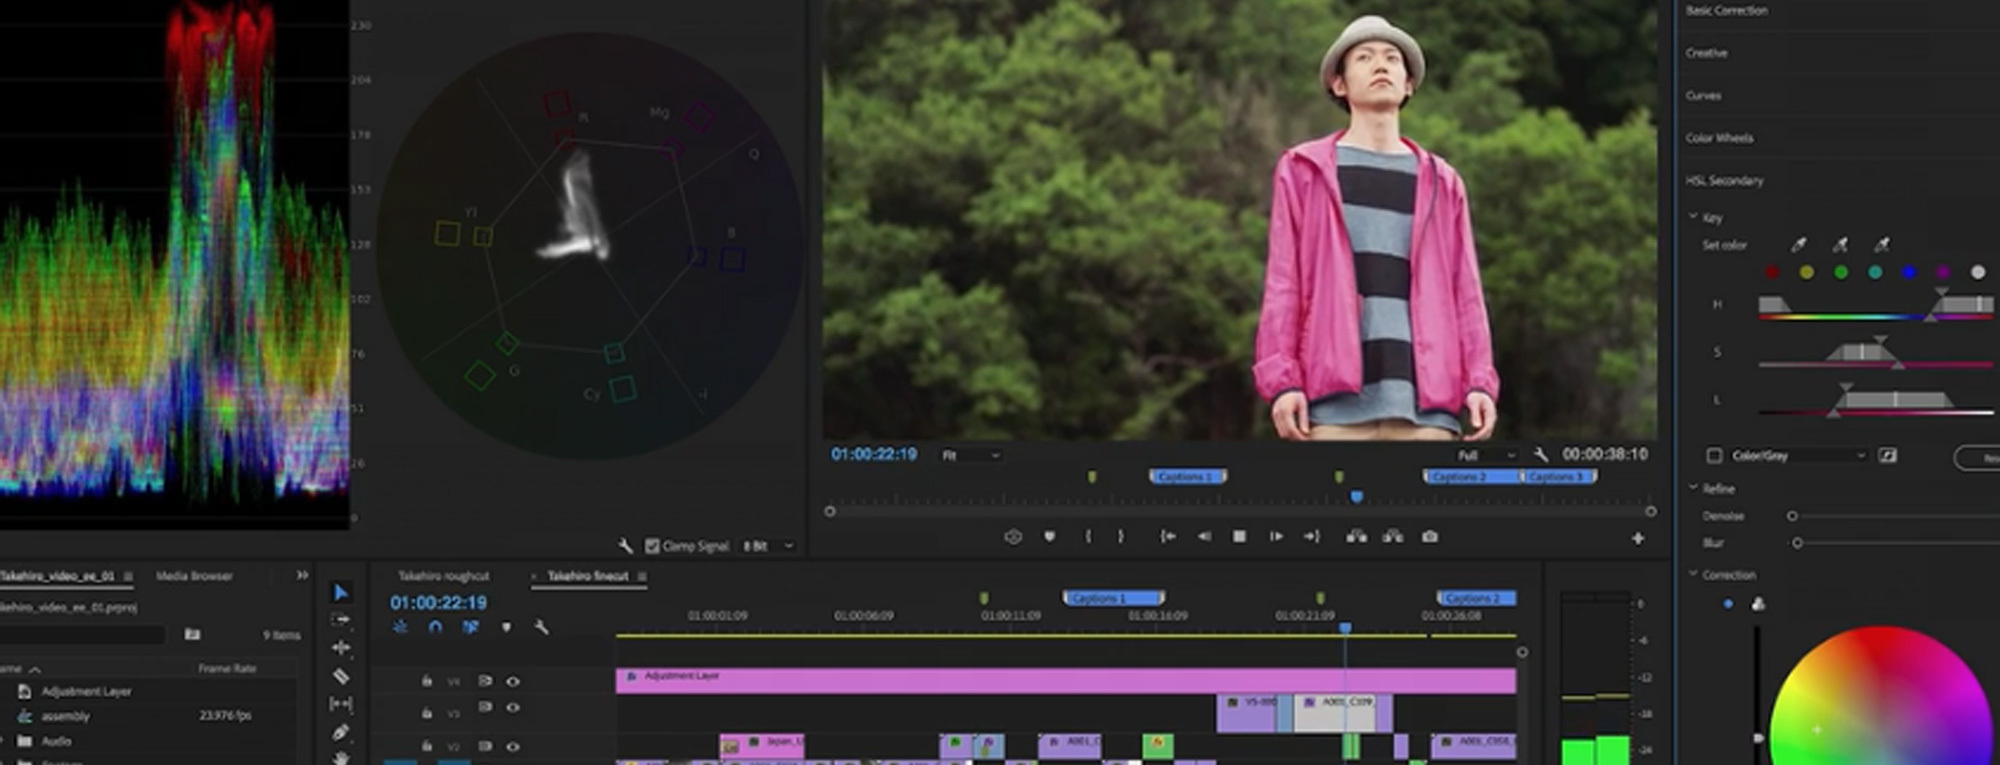 Editing video footage in Premiere Pro